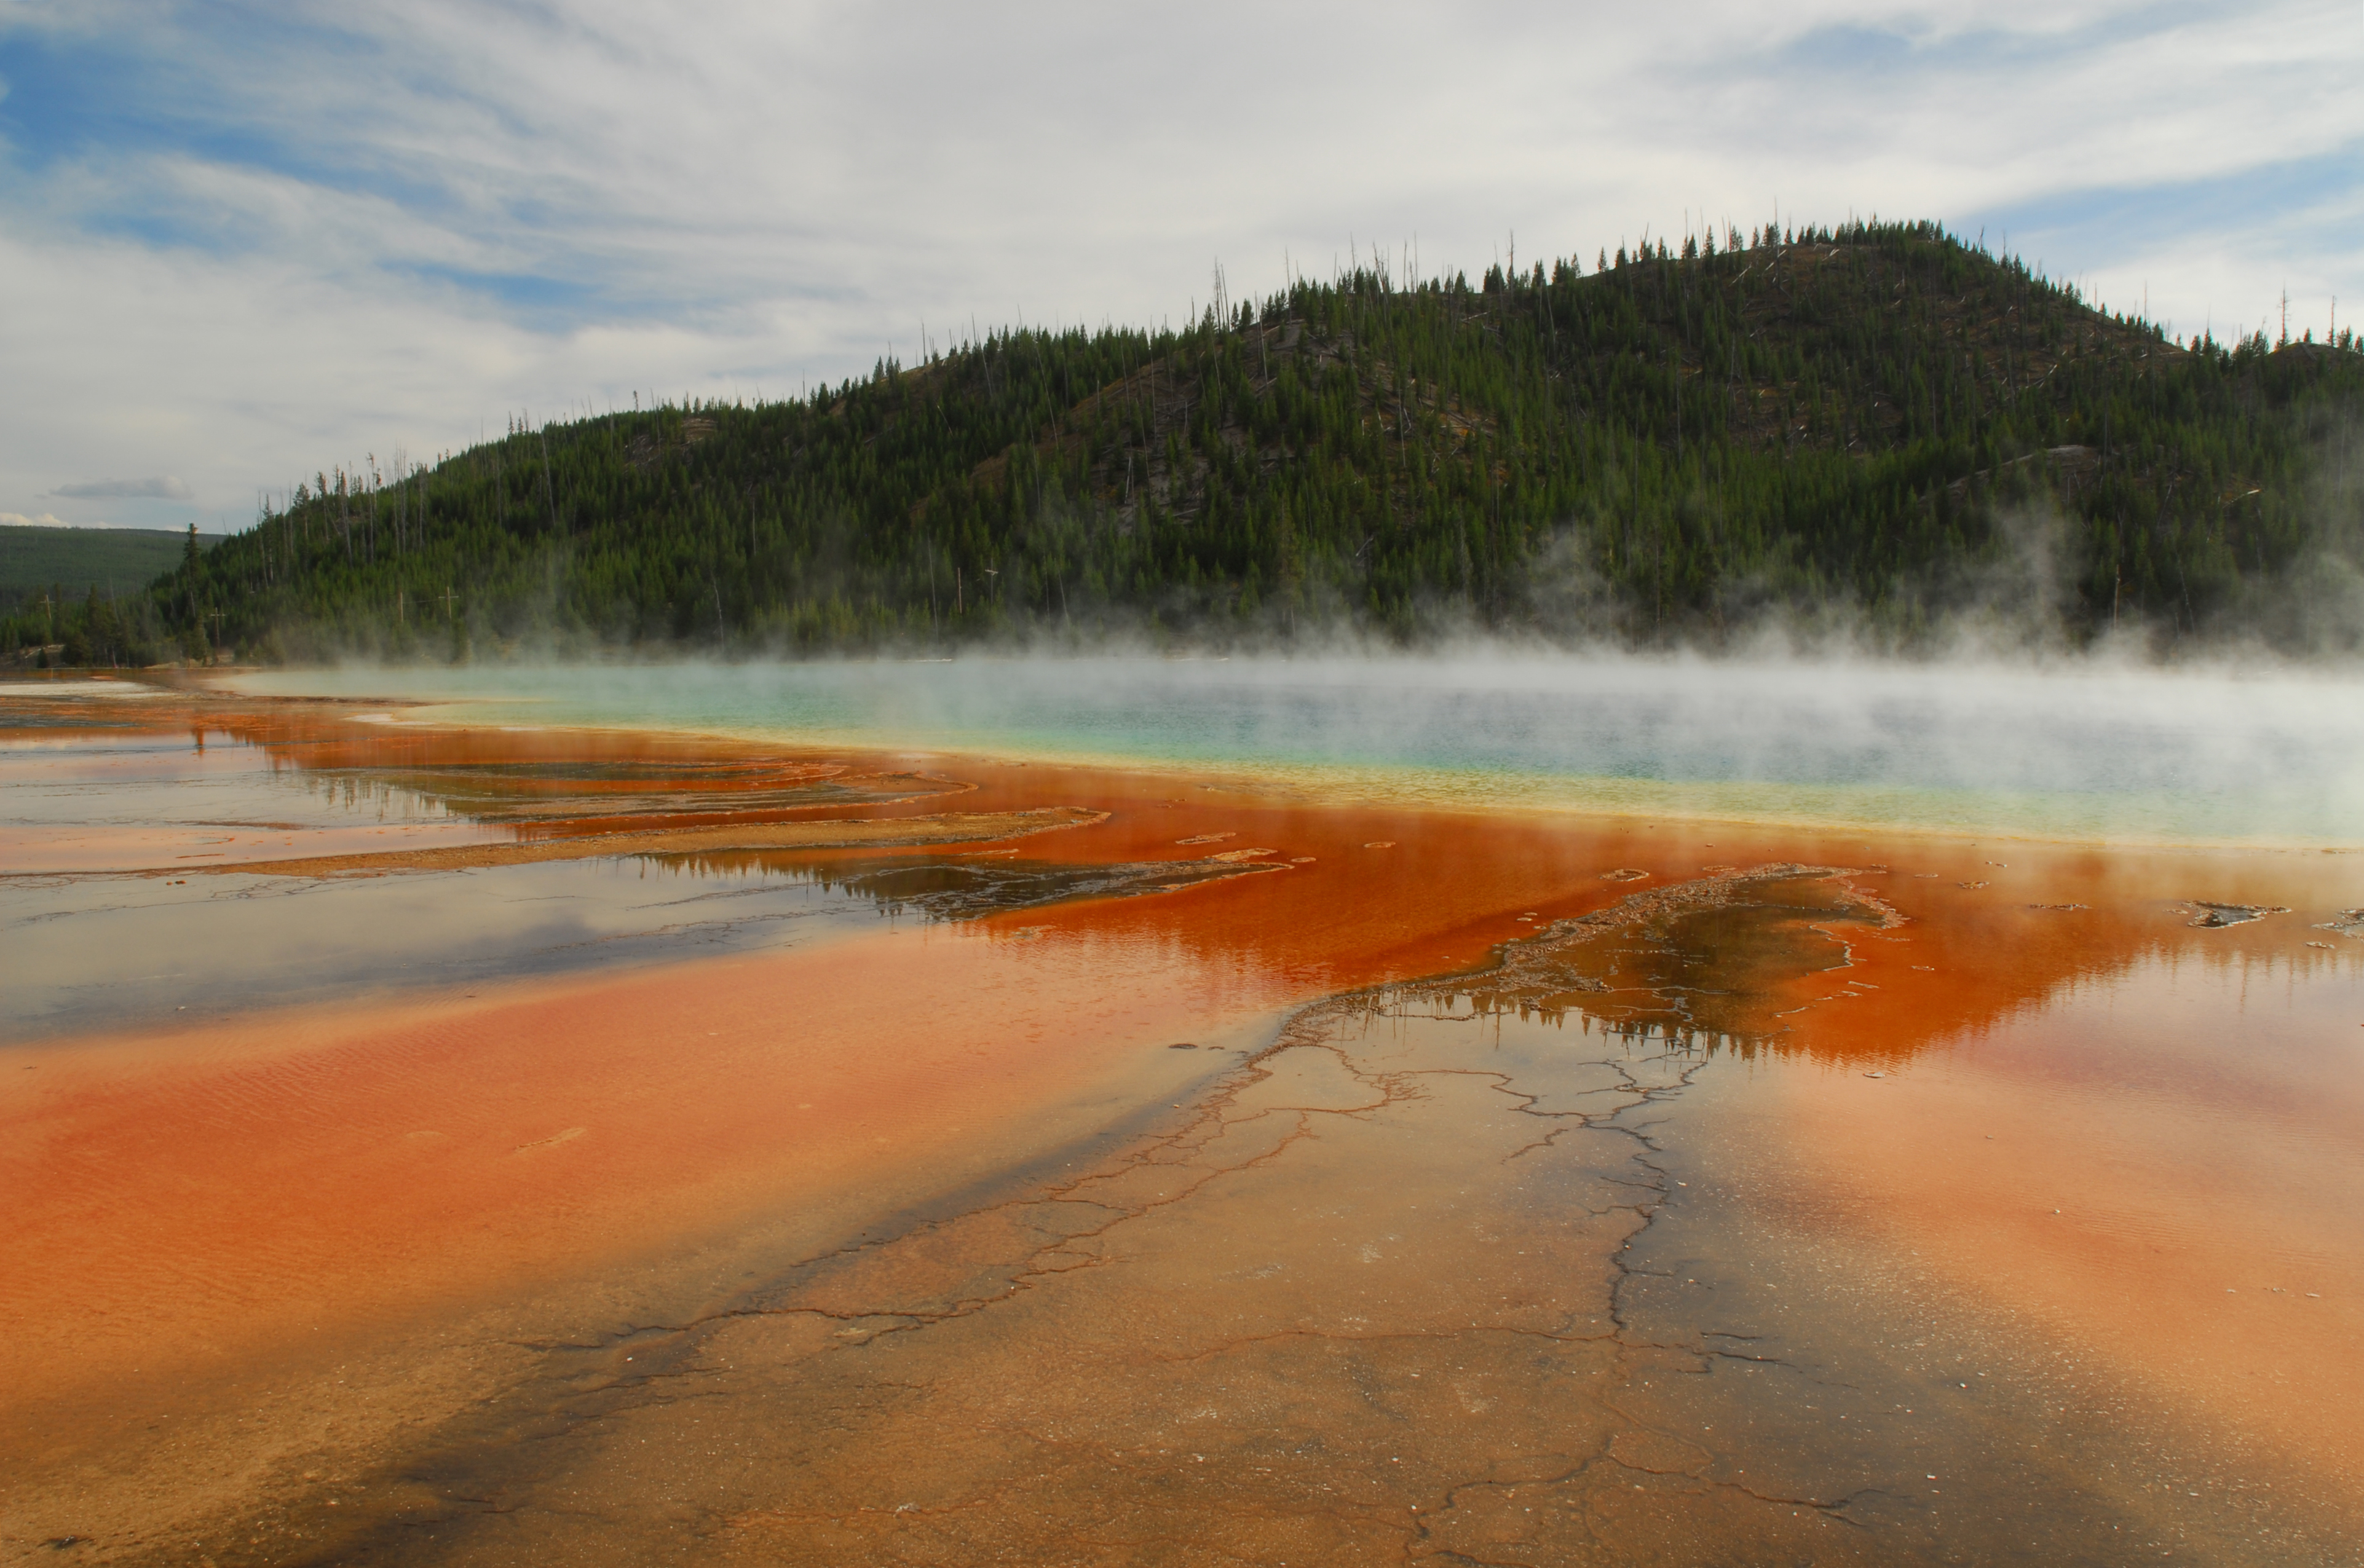 Grand Prismatic Spring  -  Midway Geyser Basin, Yellowstone National Park, Wyoming